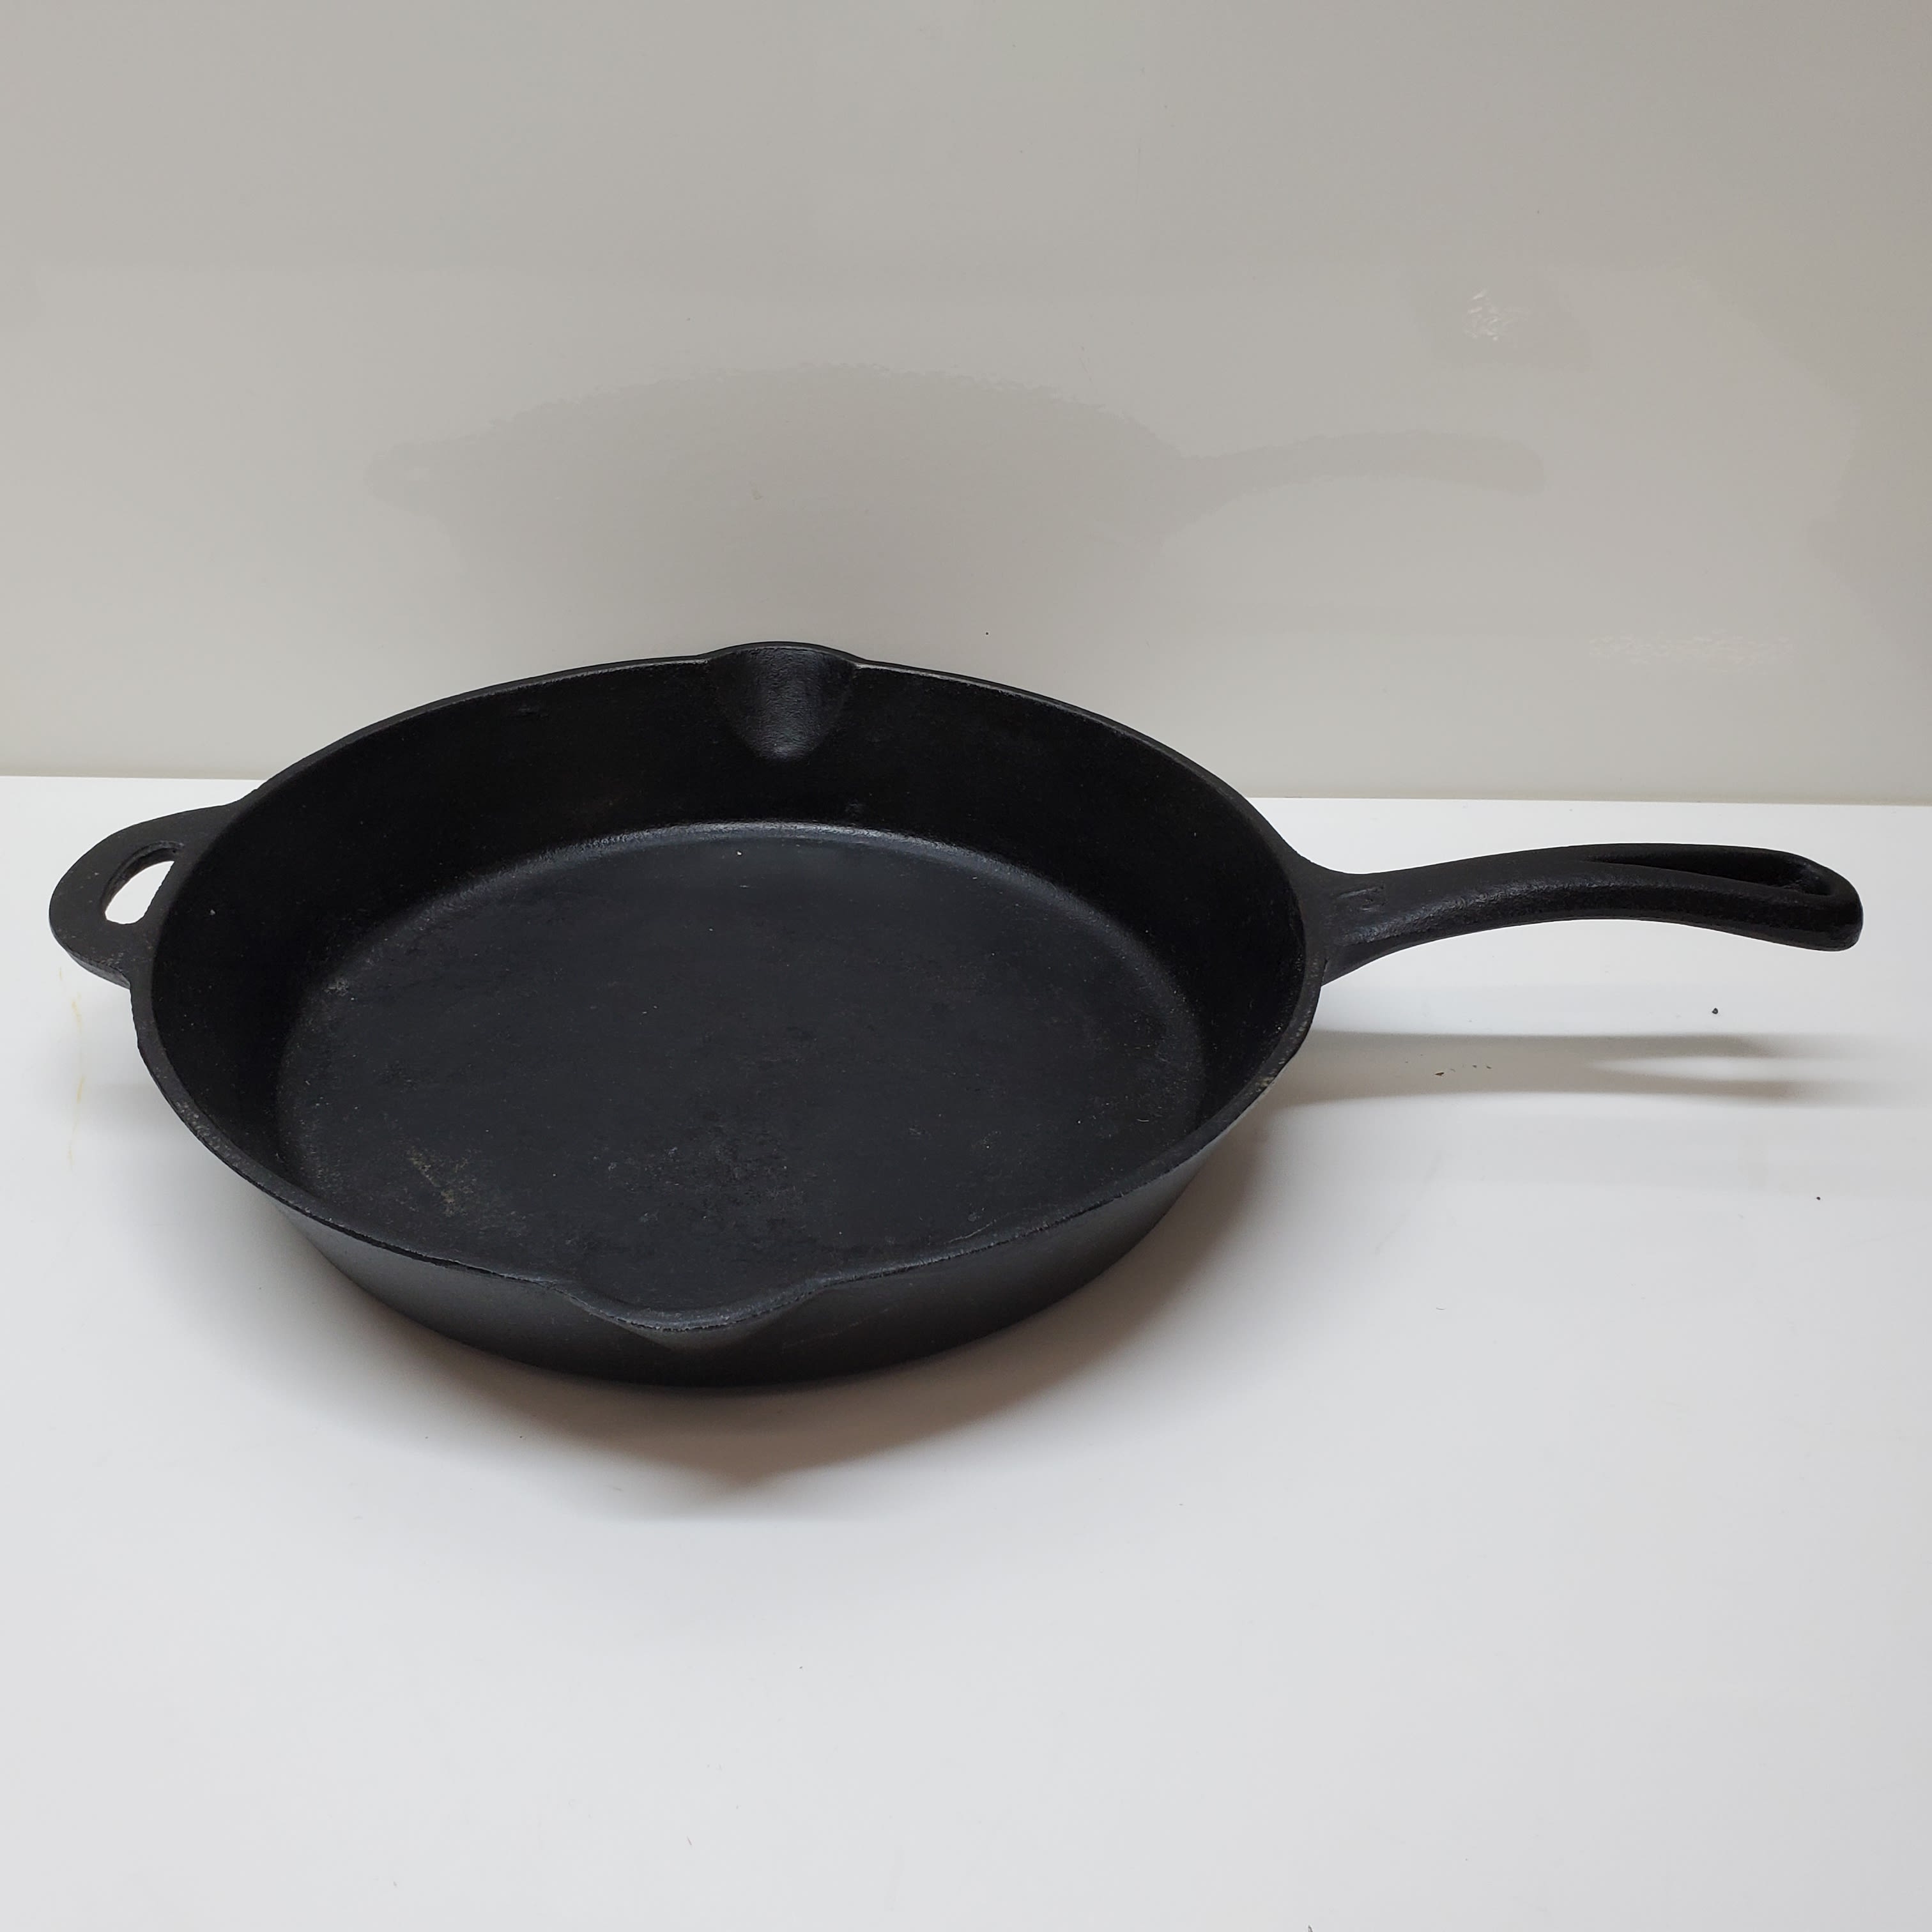 CAST IRON Country Charm ELECTRIC SKILLET